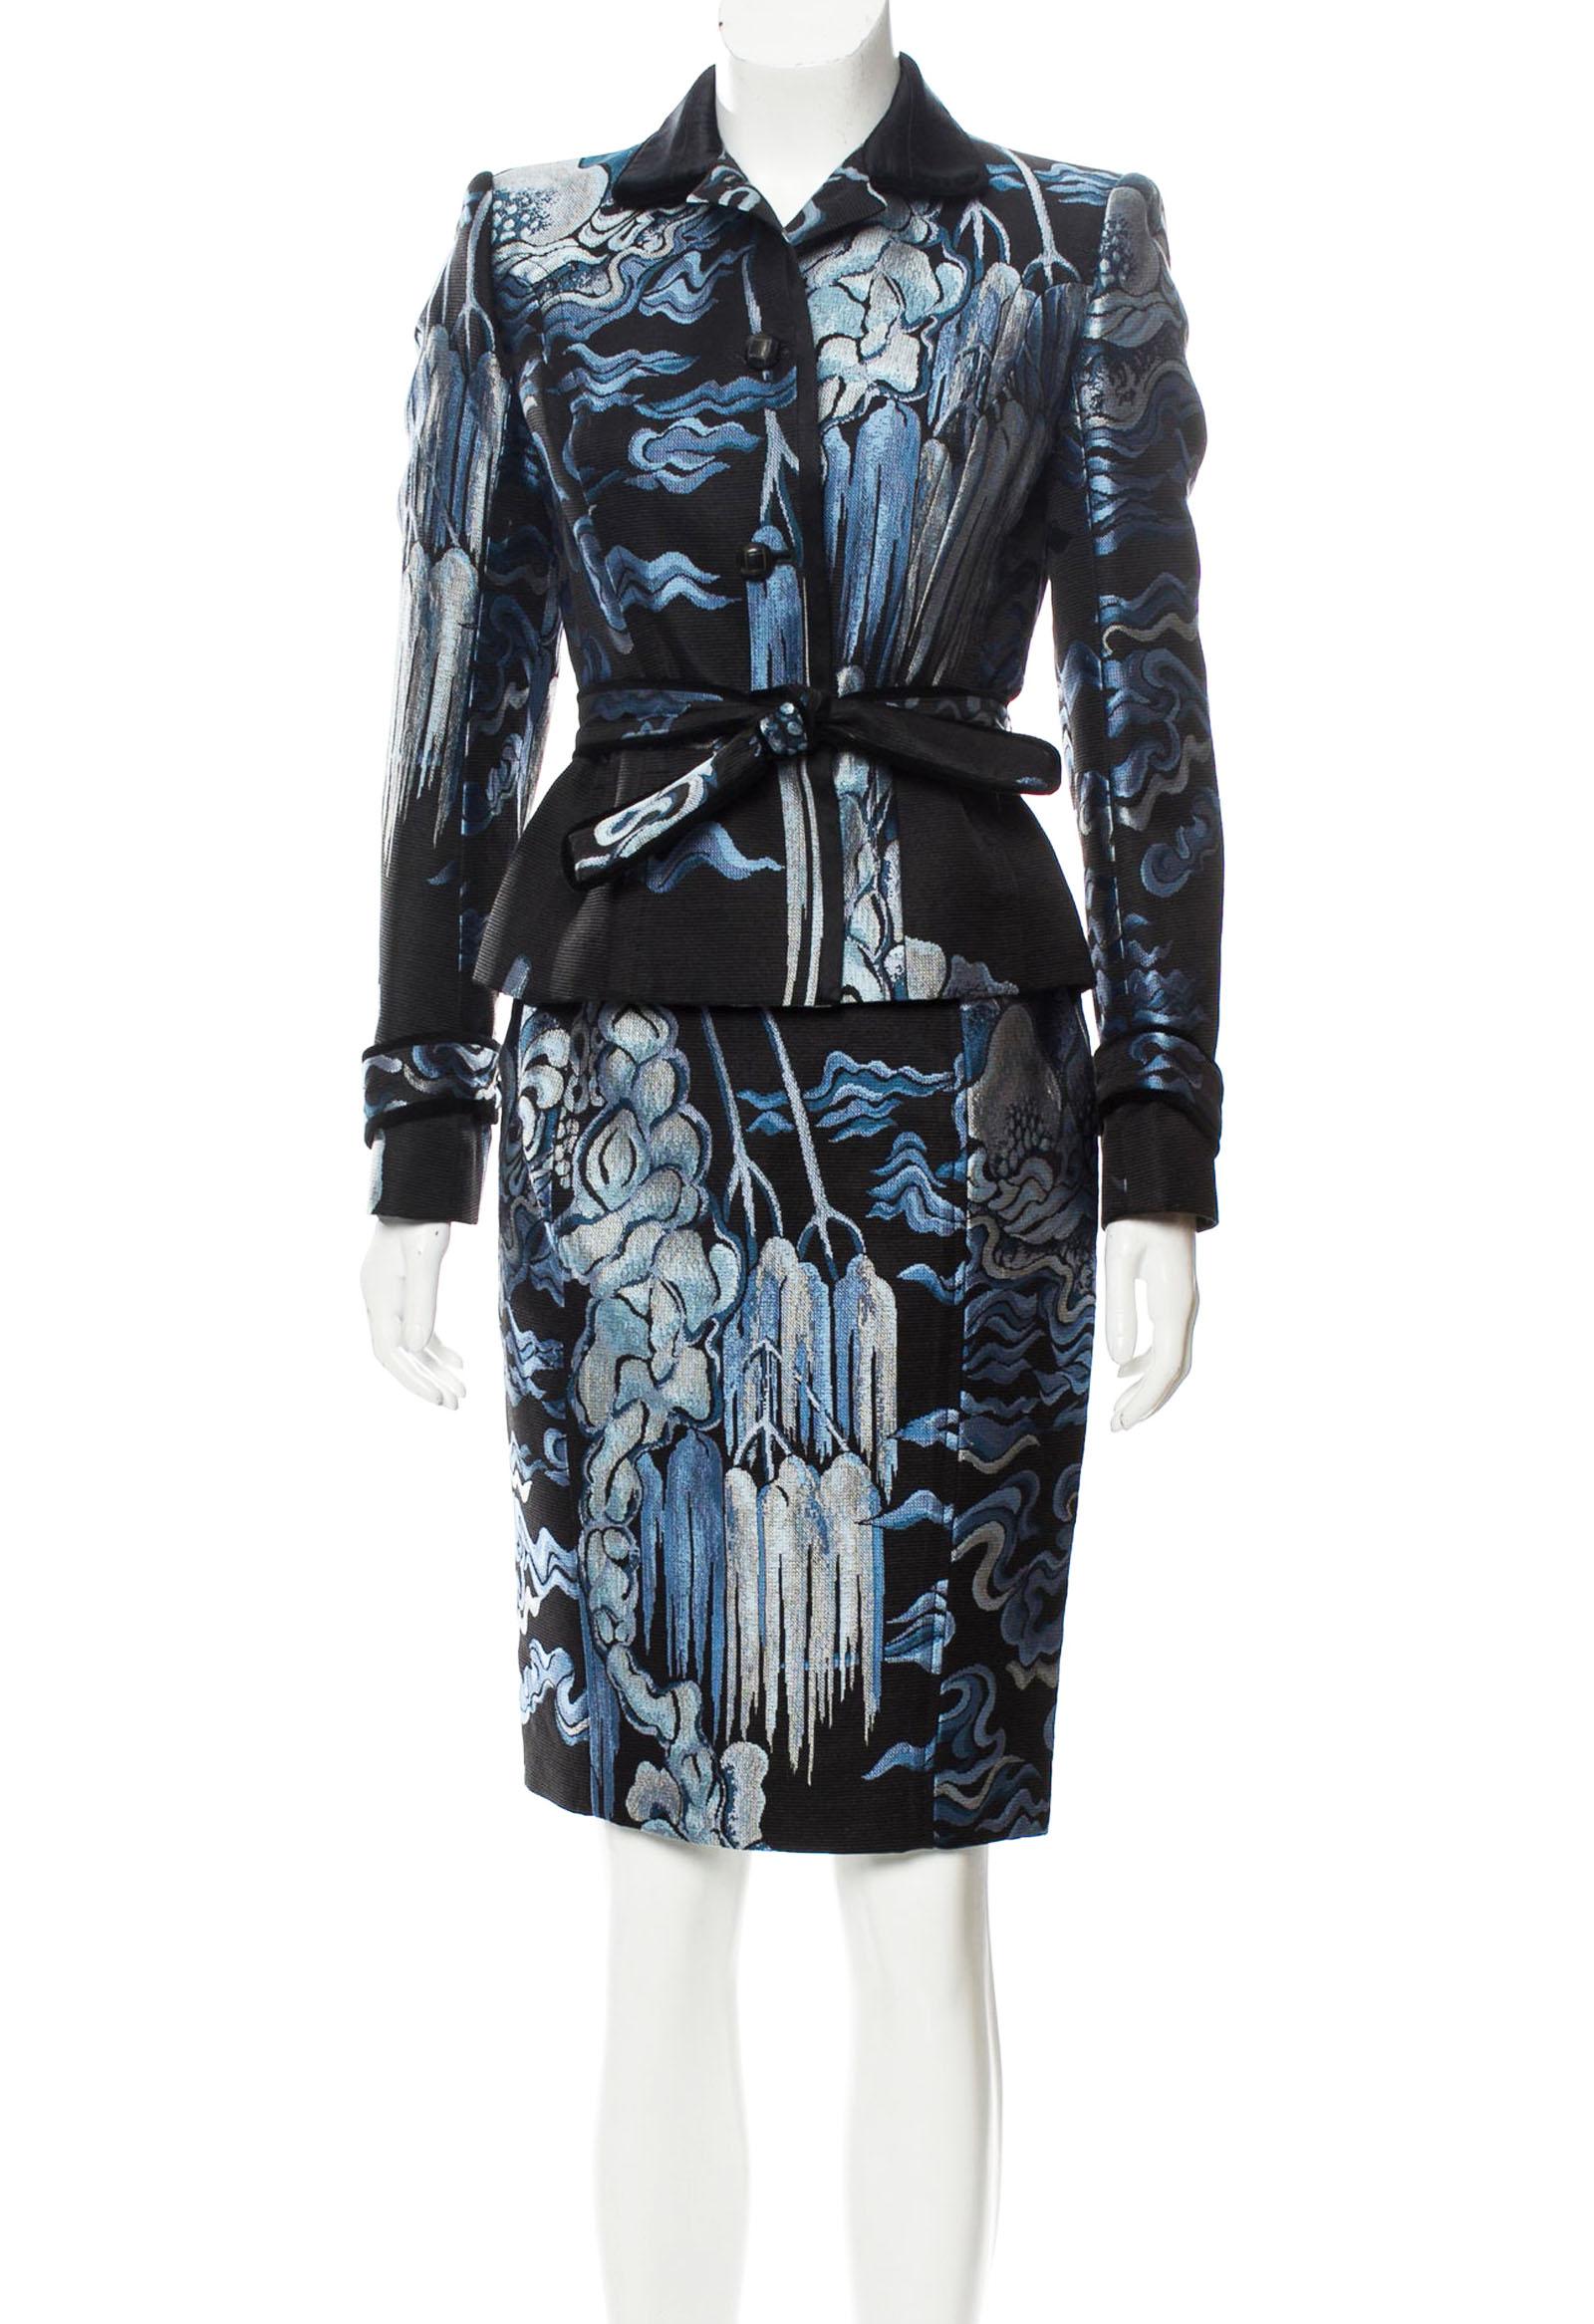 Tom Ford for Yves Saint Laurent Chinoiserie Skirt Suit
Inspired by the 1977 Chinese Collection that coincided with the launch of Opium.
F/W 2004 Collection
French size 38
A mixture of Light, Silvery-Blues, Bright and Deeper Blues with Black.  57%